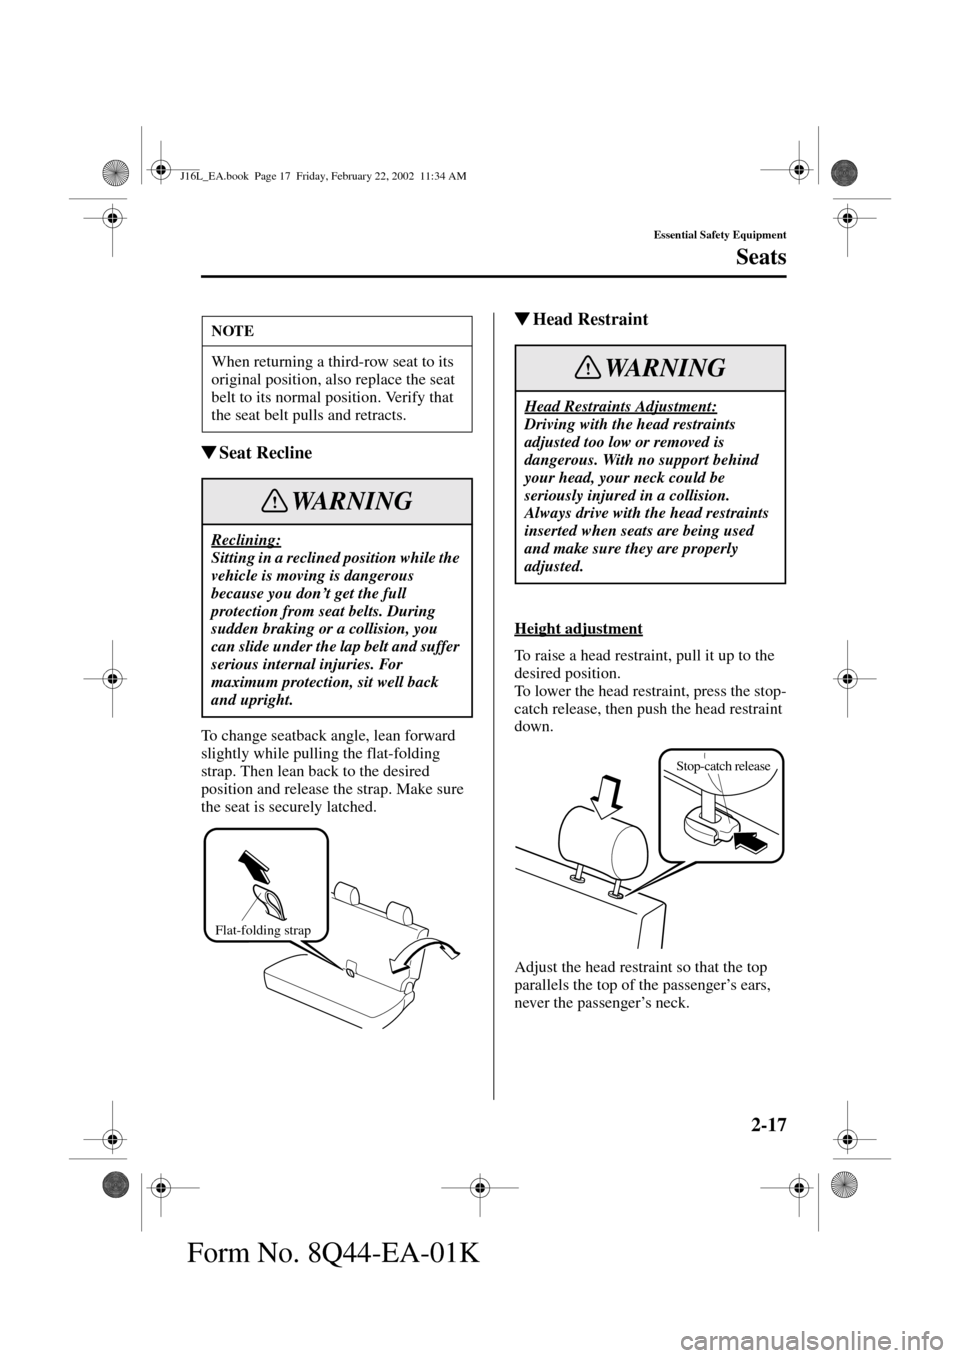 MAZDA MODEL MPV 2002   (in English) Owners Manual 2-17
Essential Safety Equipment
Seats
Form No. 8Q44-EA-01K
Seat Recline
To change seatback angle, lean forward 
slightly while pulling the flat-folding 
strap. Then lean back to the desired 
position